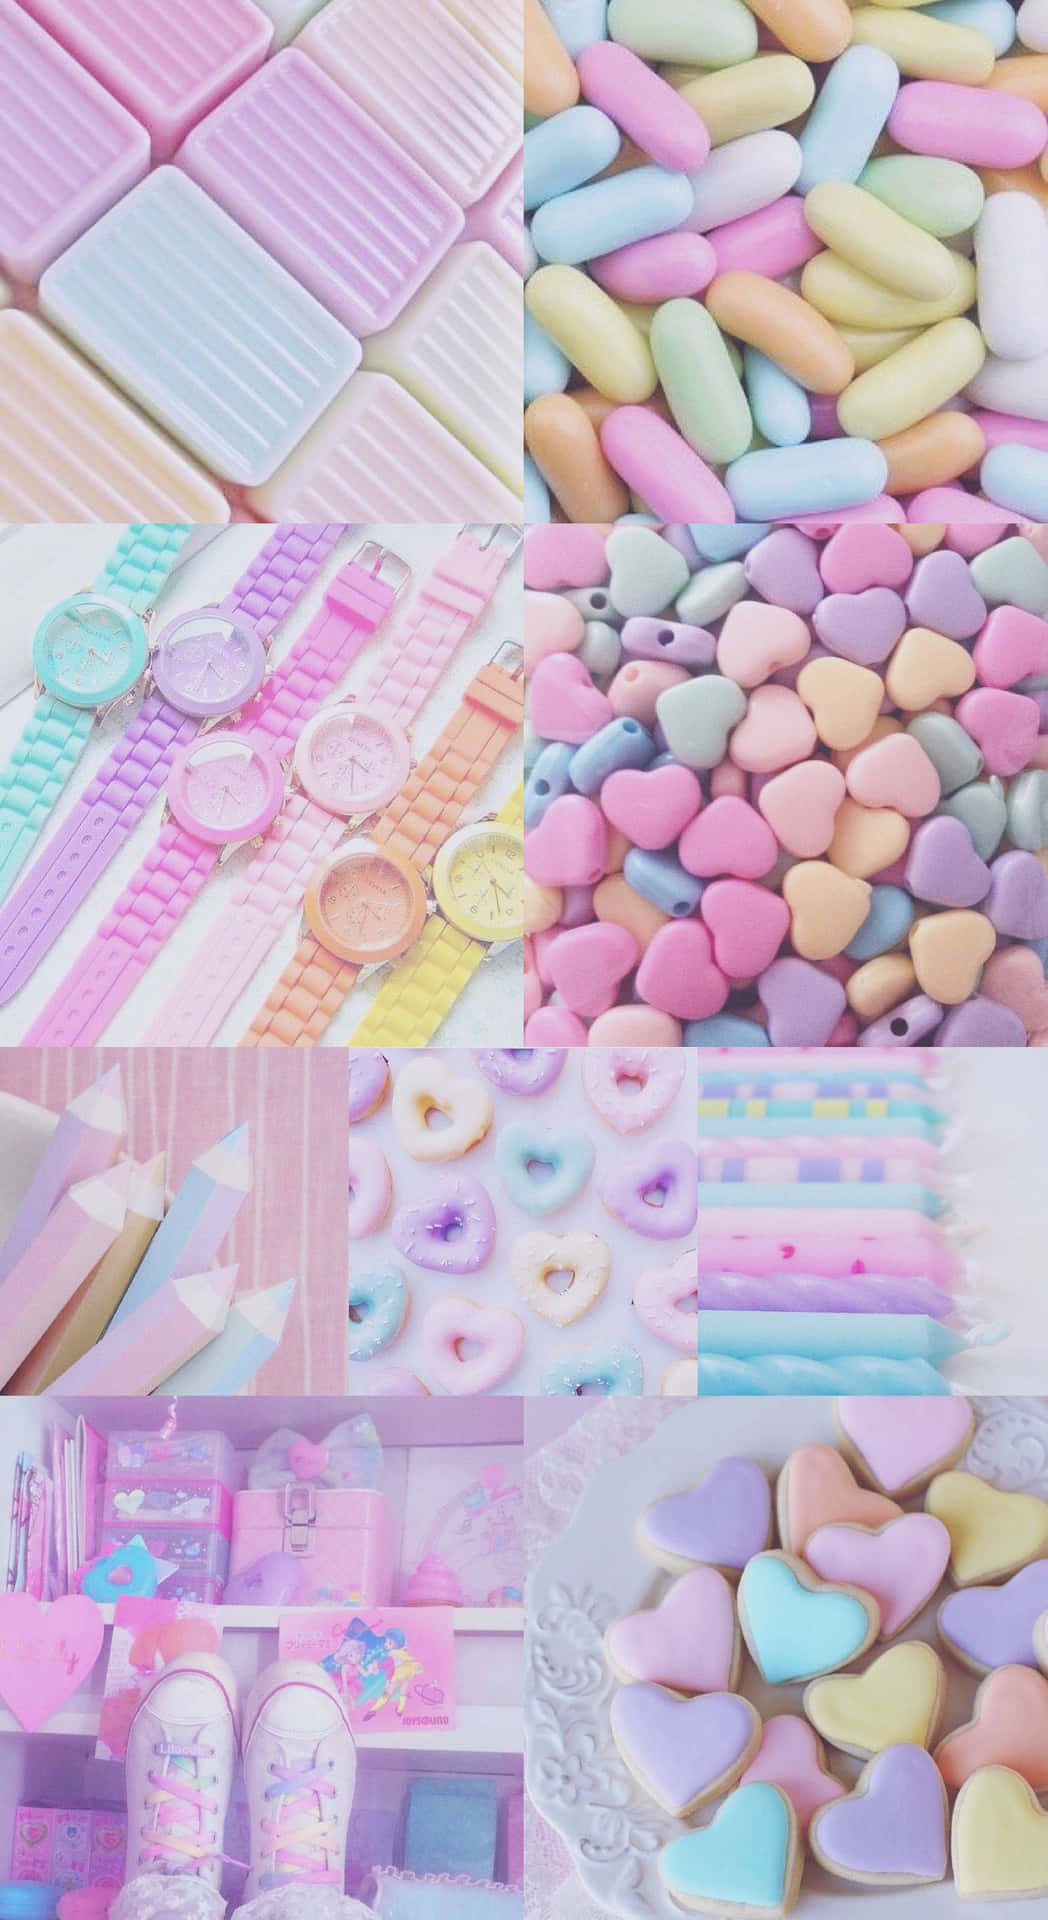 A Collage Of Pictures Of Various Pastel Colored Items Wallpaper